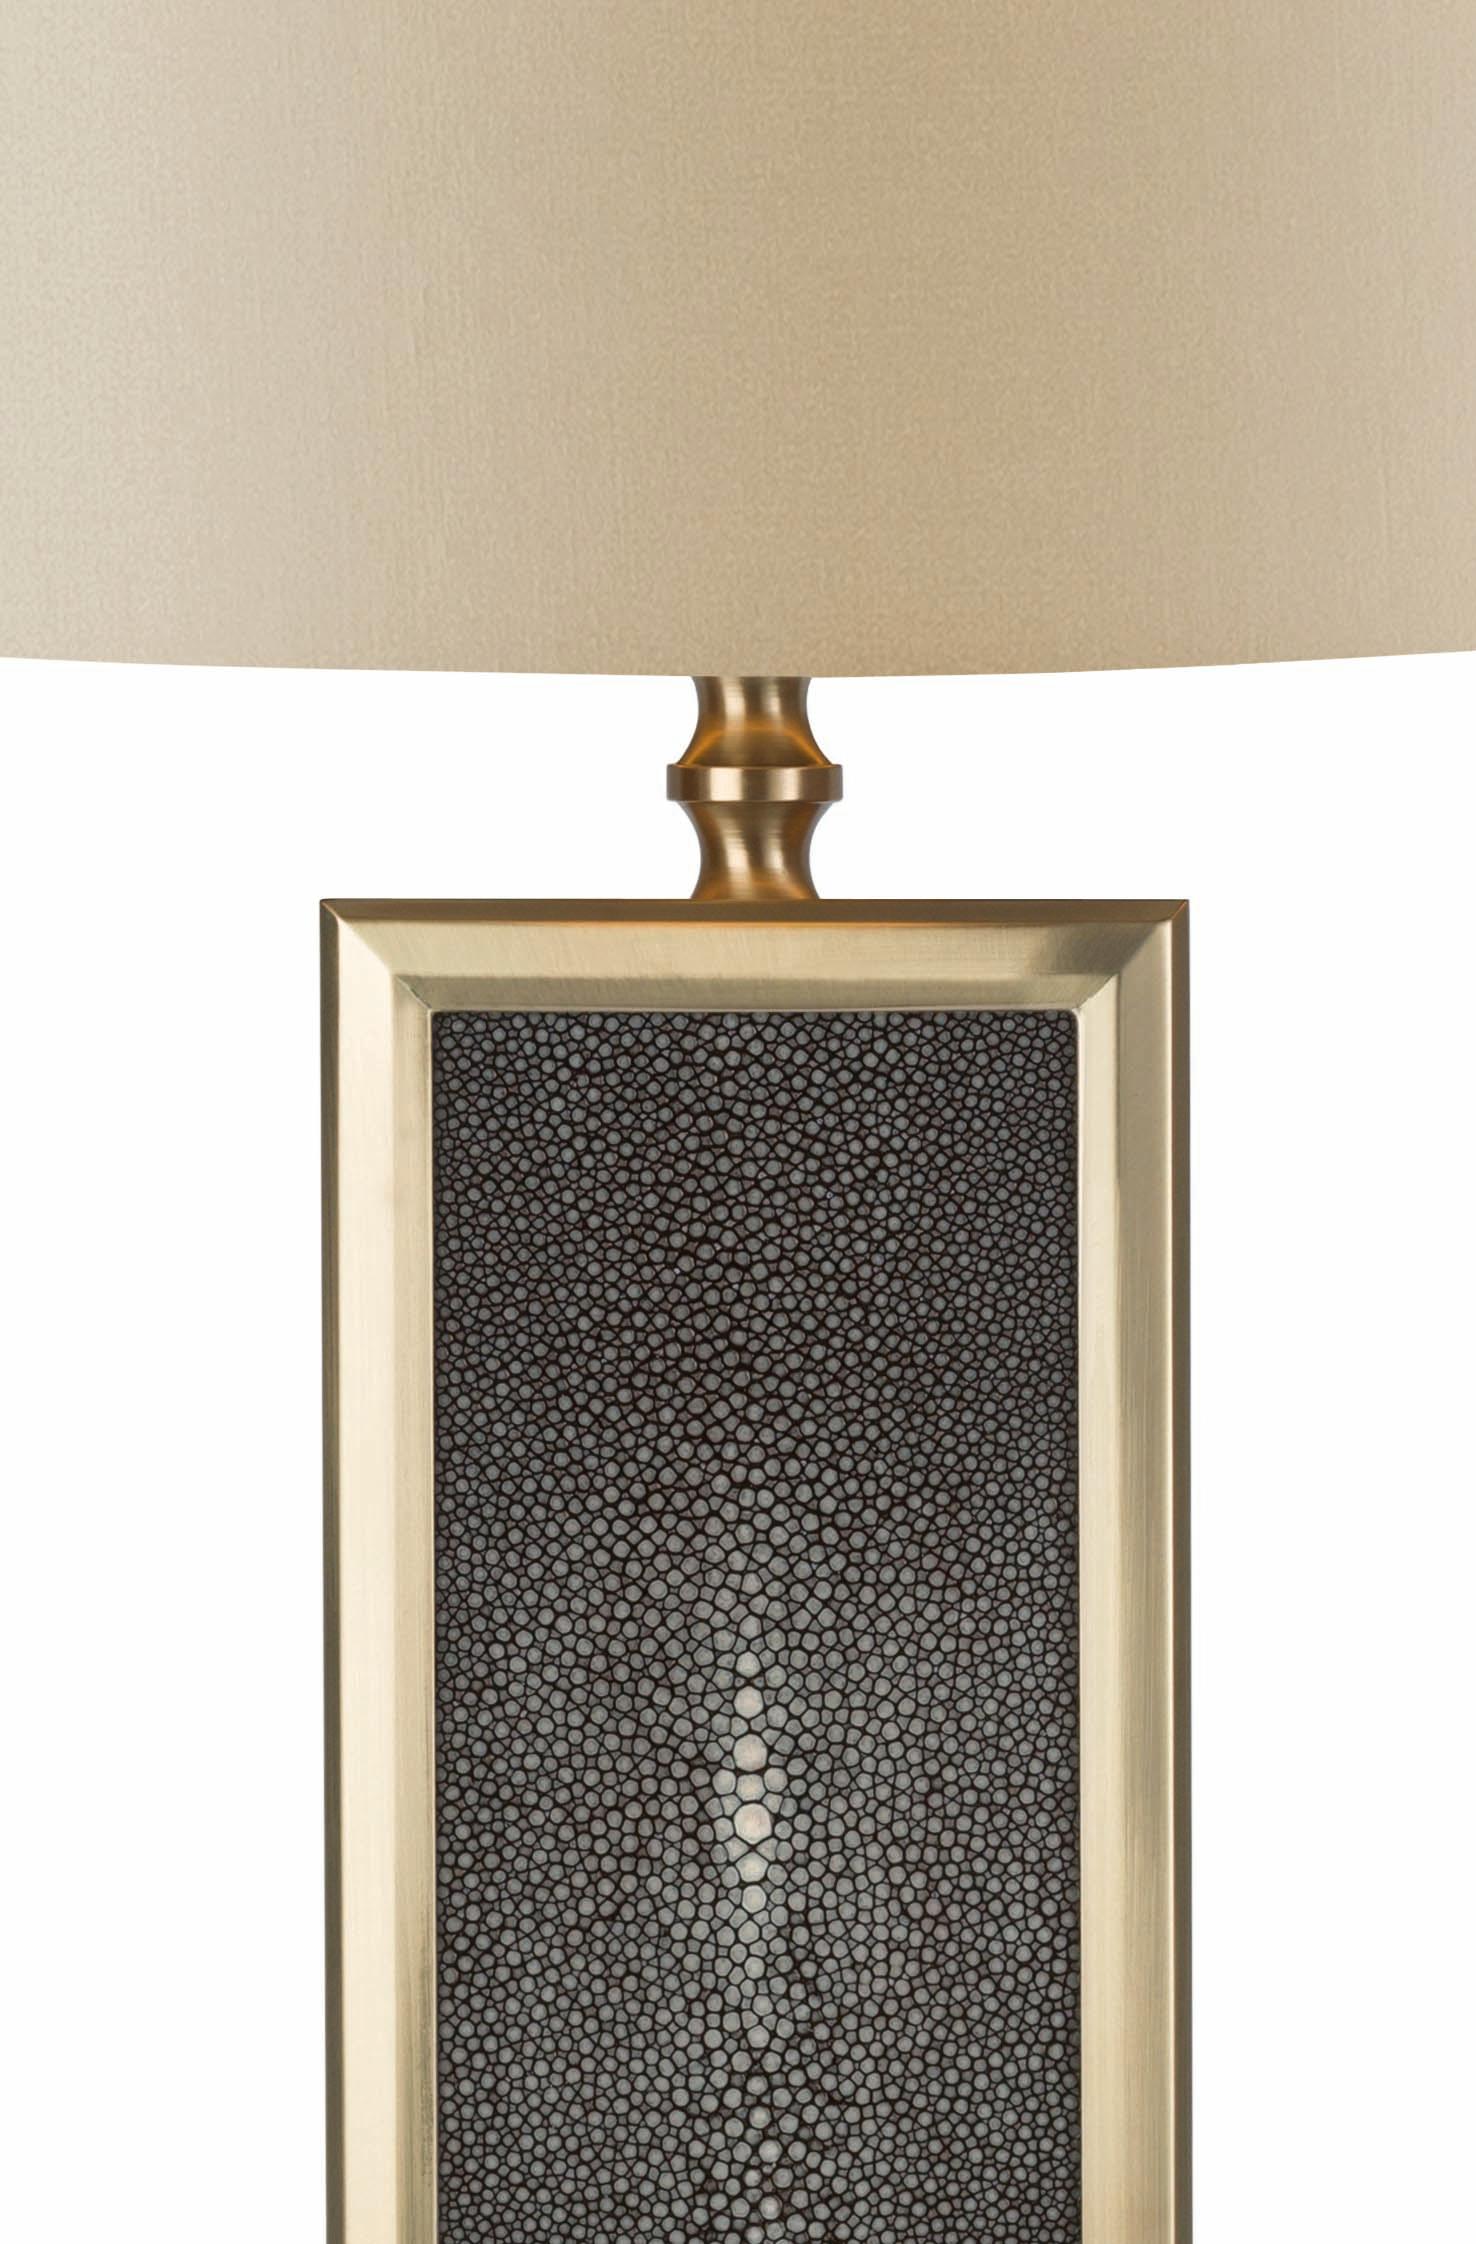 The sophisticated Flute table lamp features noble materials and traditional craftsmanship combined with a contemporary design, for a timeless and elegant final effect that will make a statement in any decor. The base in Portoro marble supports a